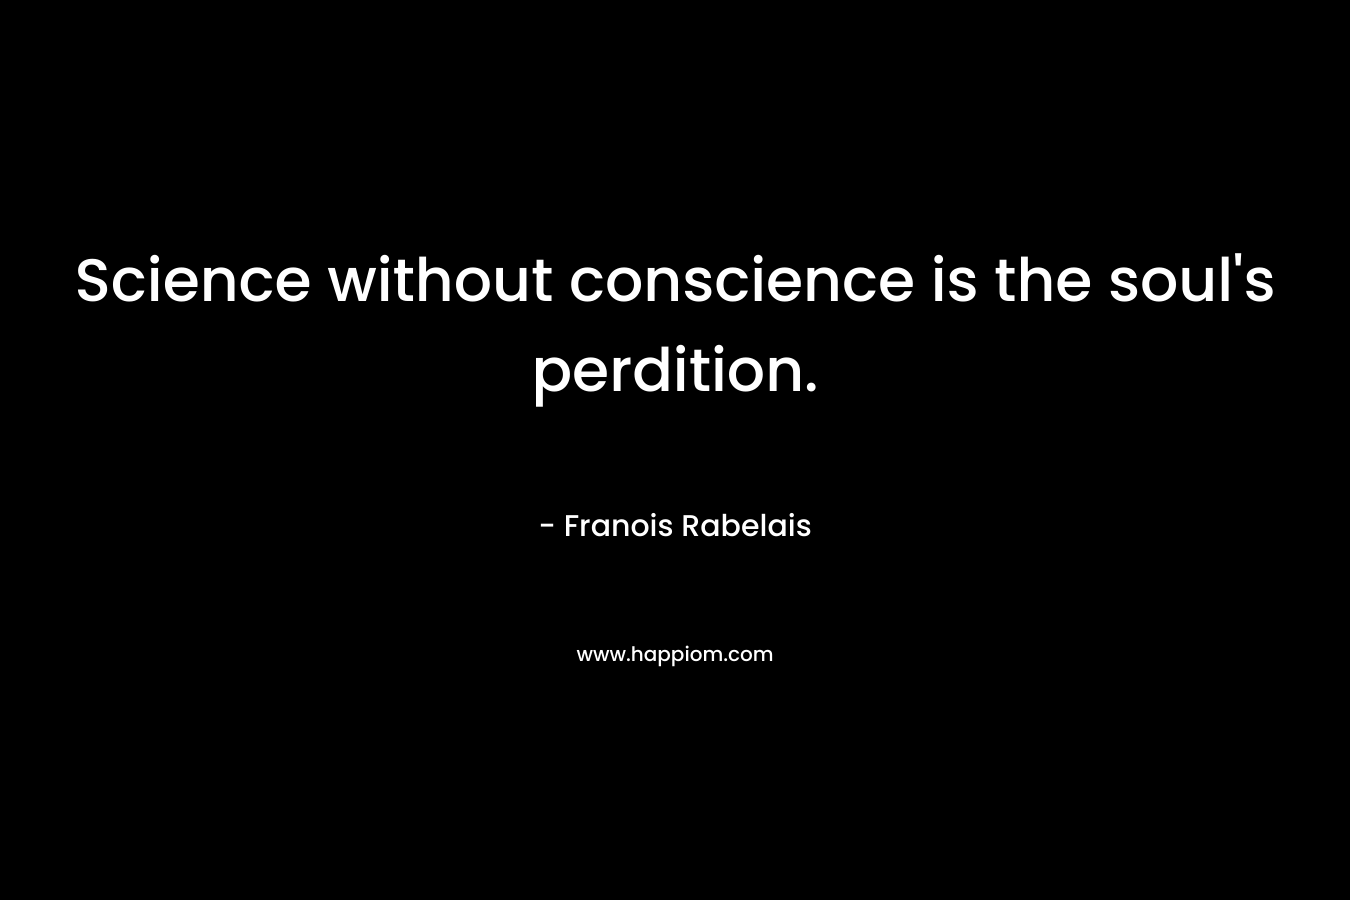 Science without conscience is the soul’s perdition. – Franois Rabelais